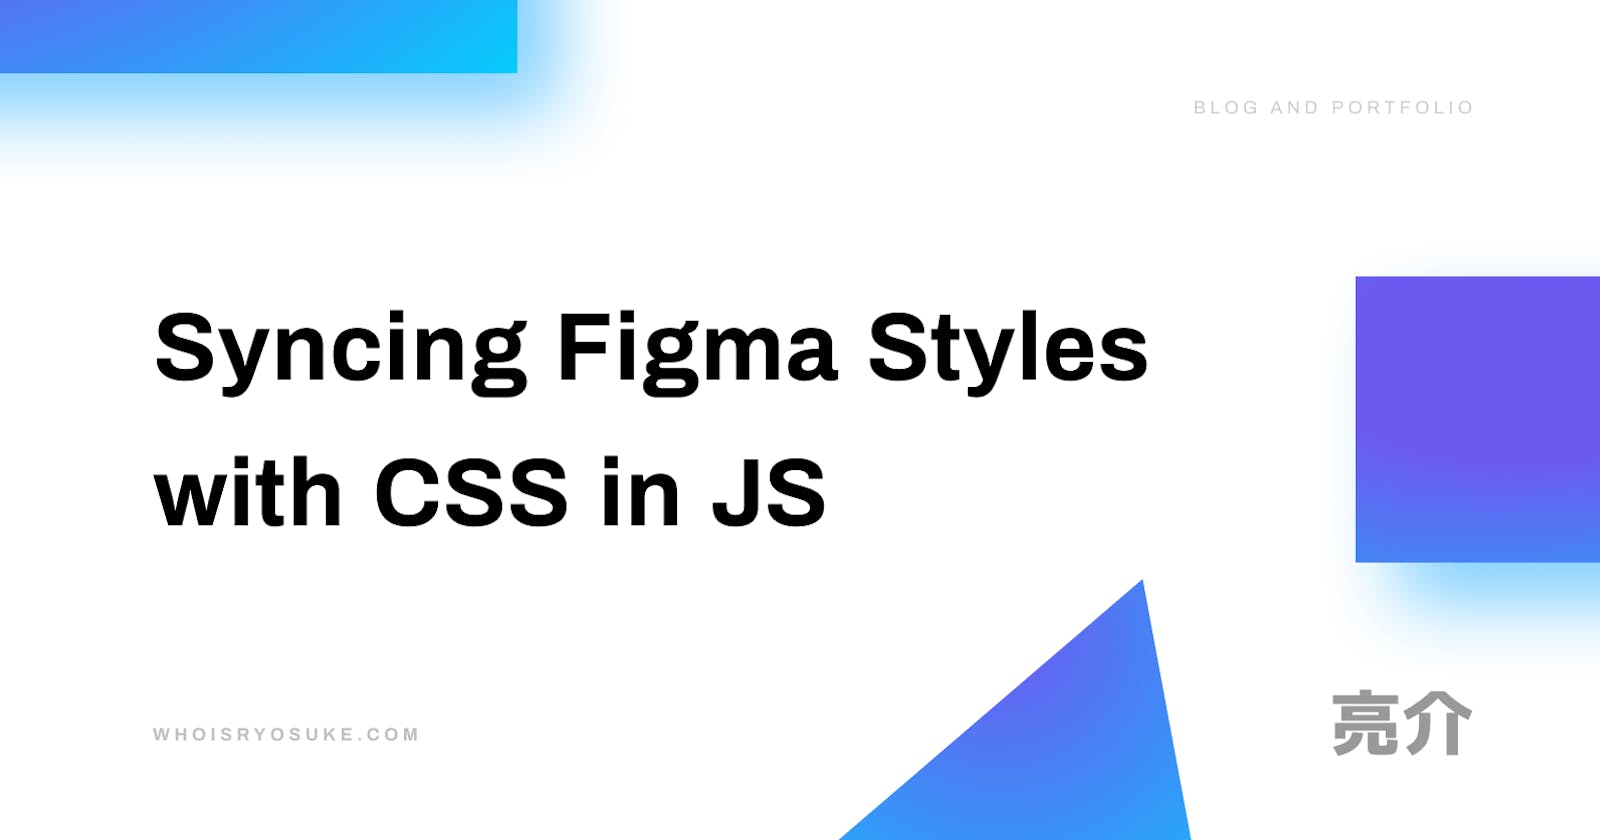 Syncing Figma Styles with CSS in JS